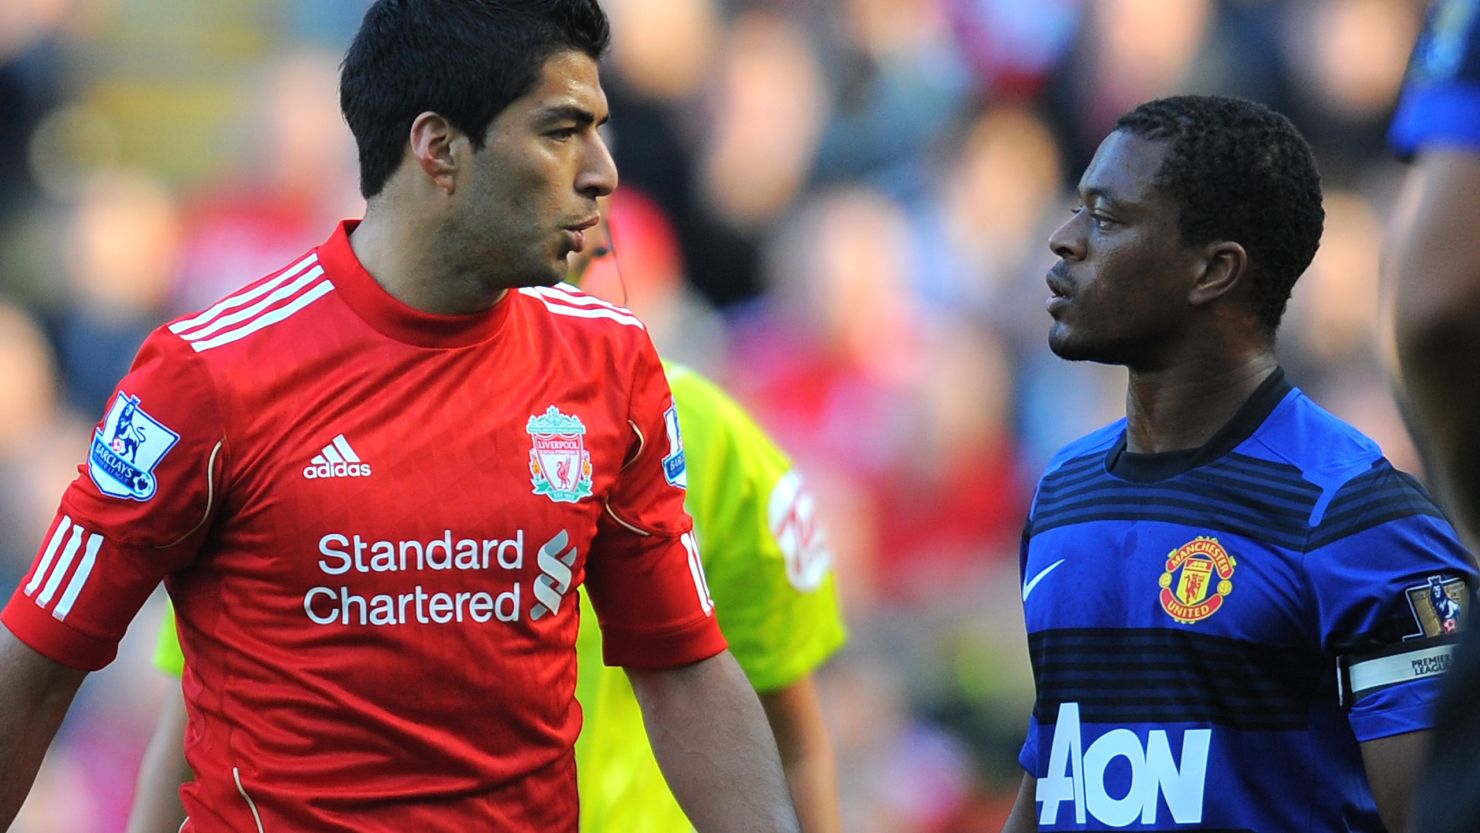 Luis Suarez and Patrice Evra are involved in a heated exchange during the October 15 match at Anfield.